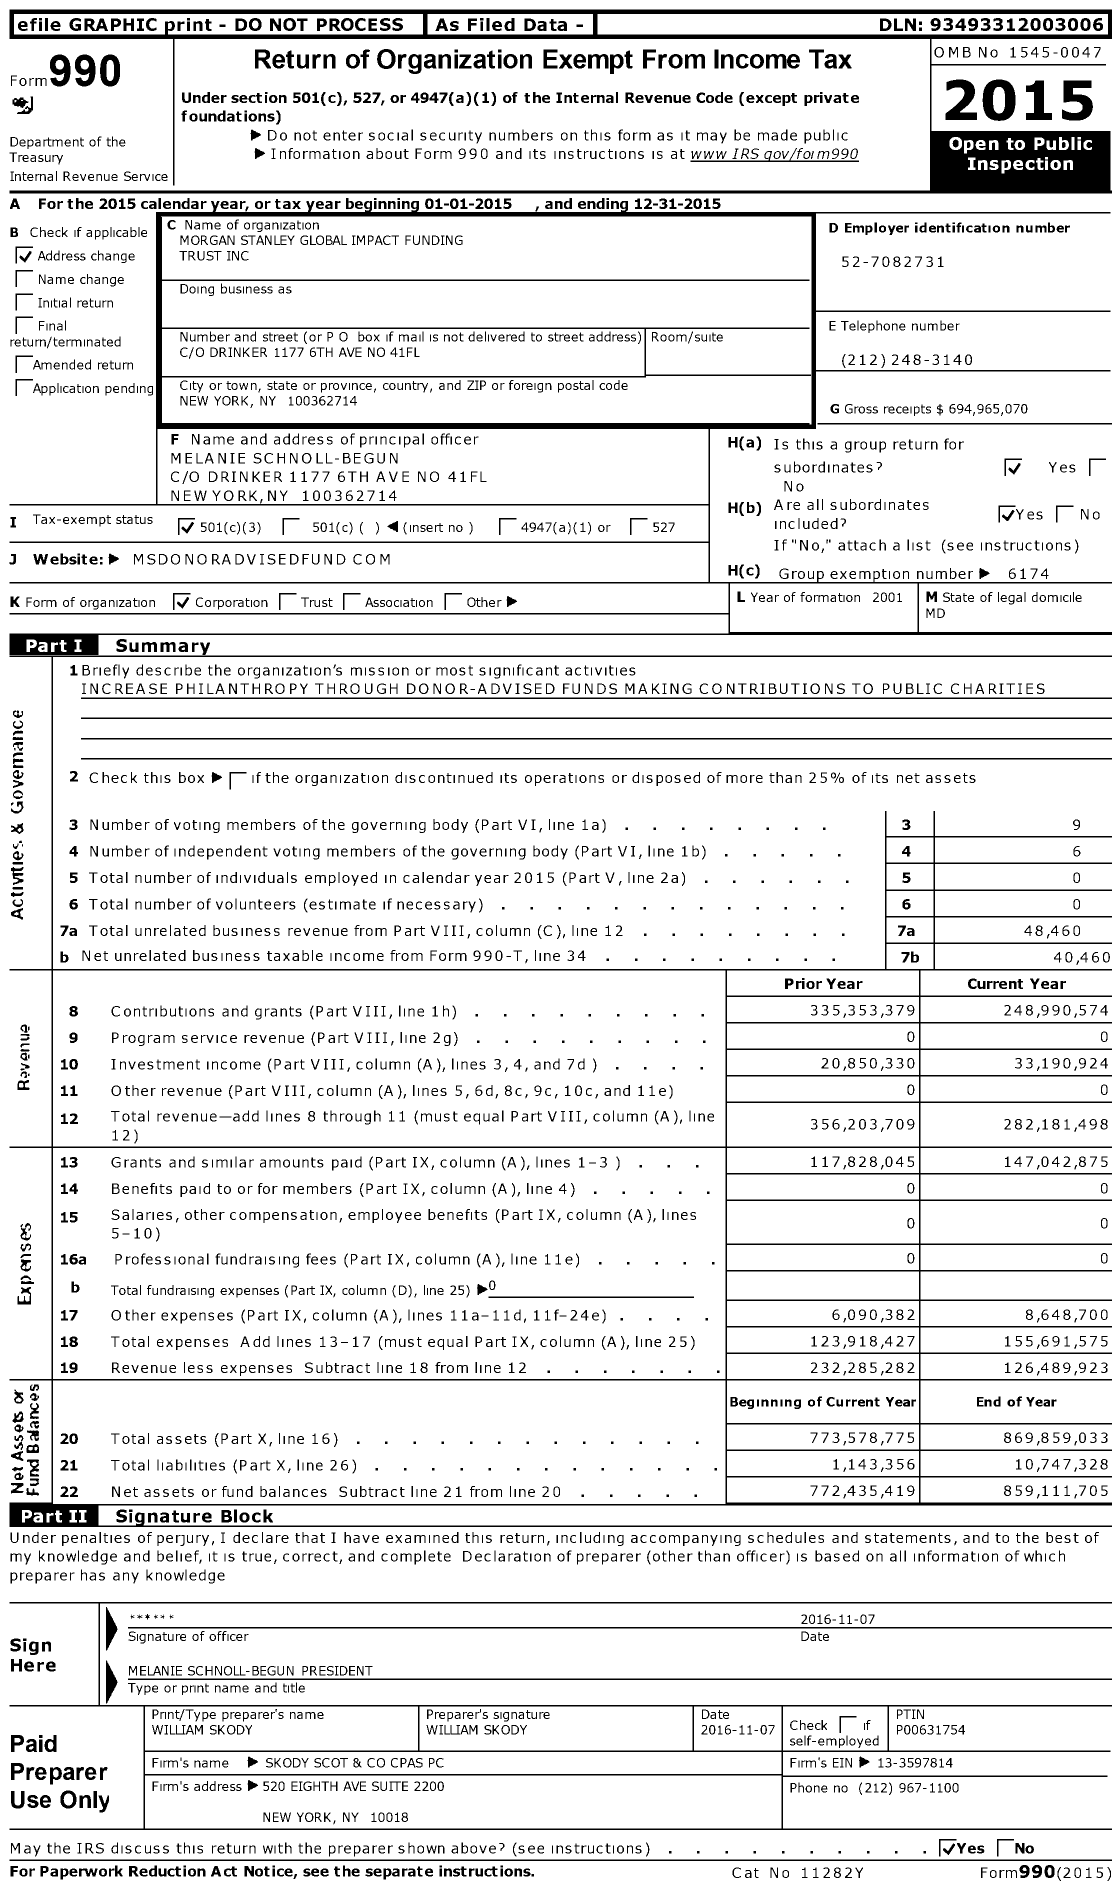 Image of first page of 2015 Form 990 for Morgan Stanley Global Impact Funding Trust